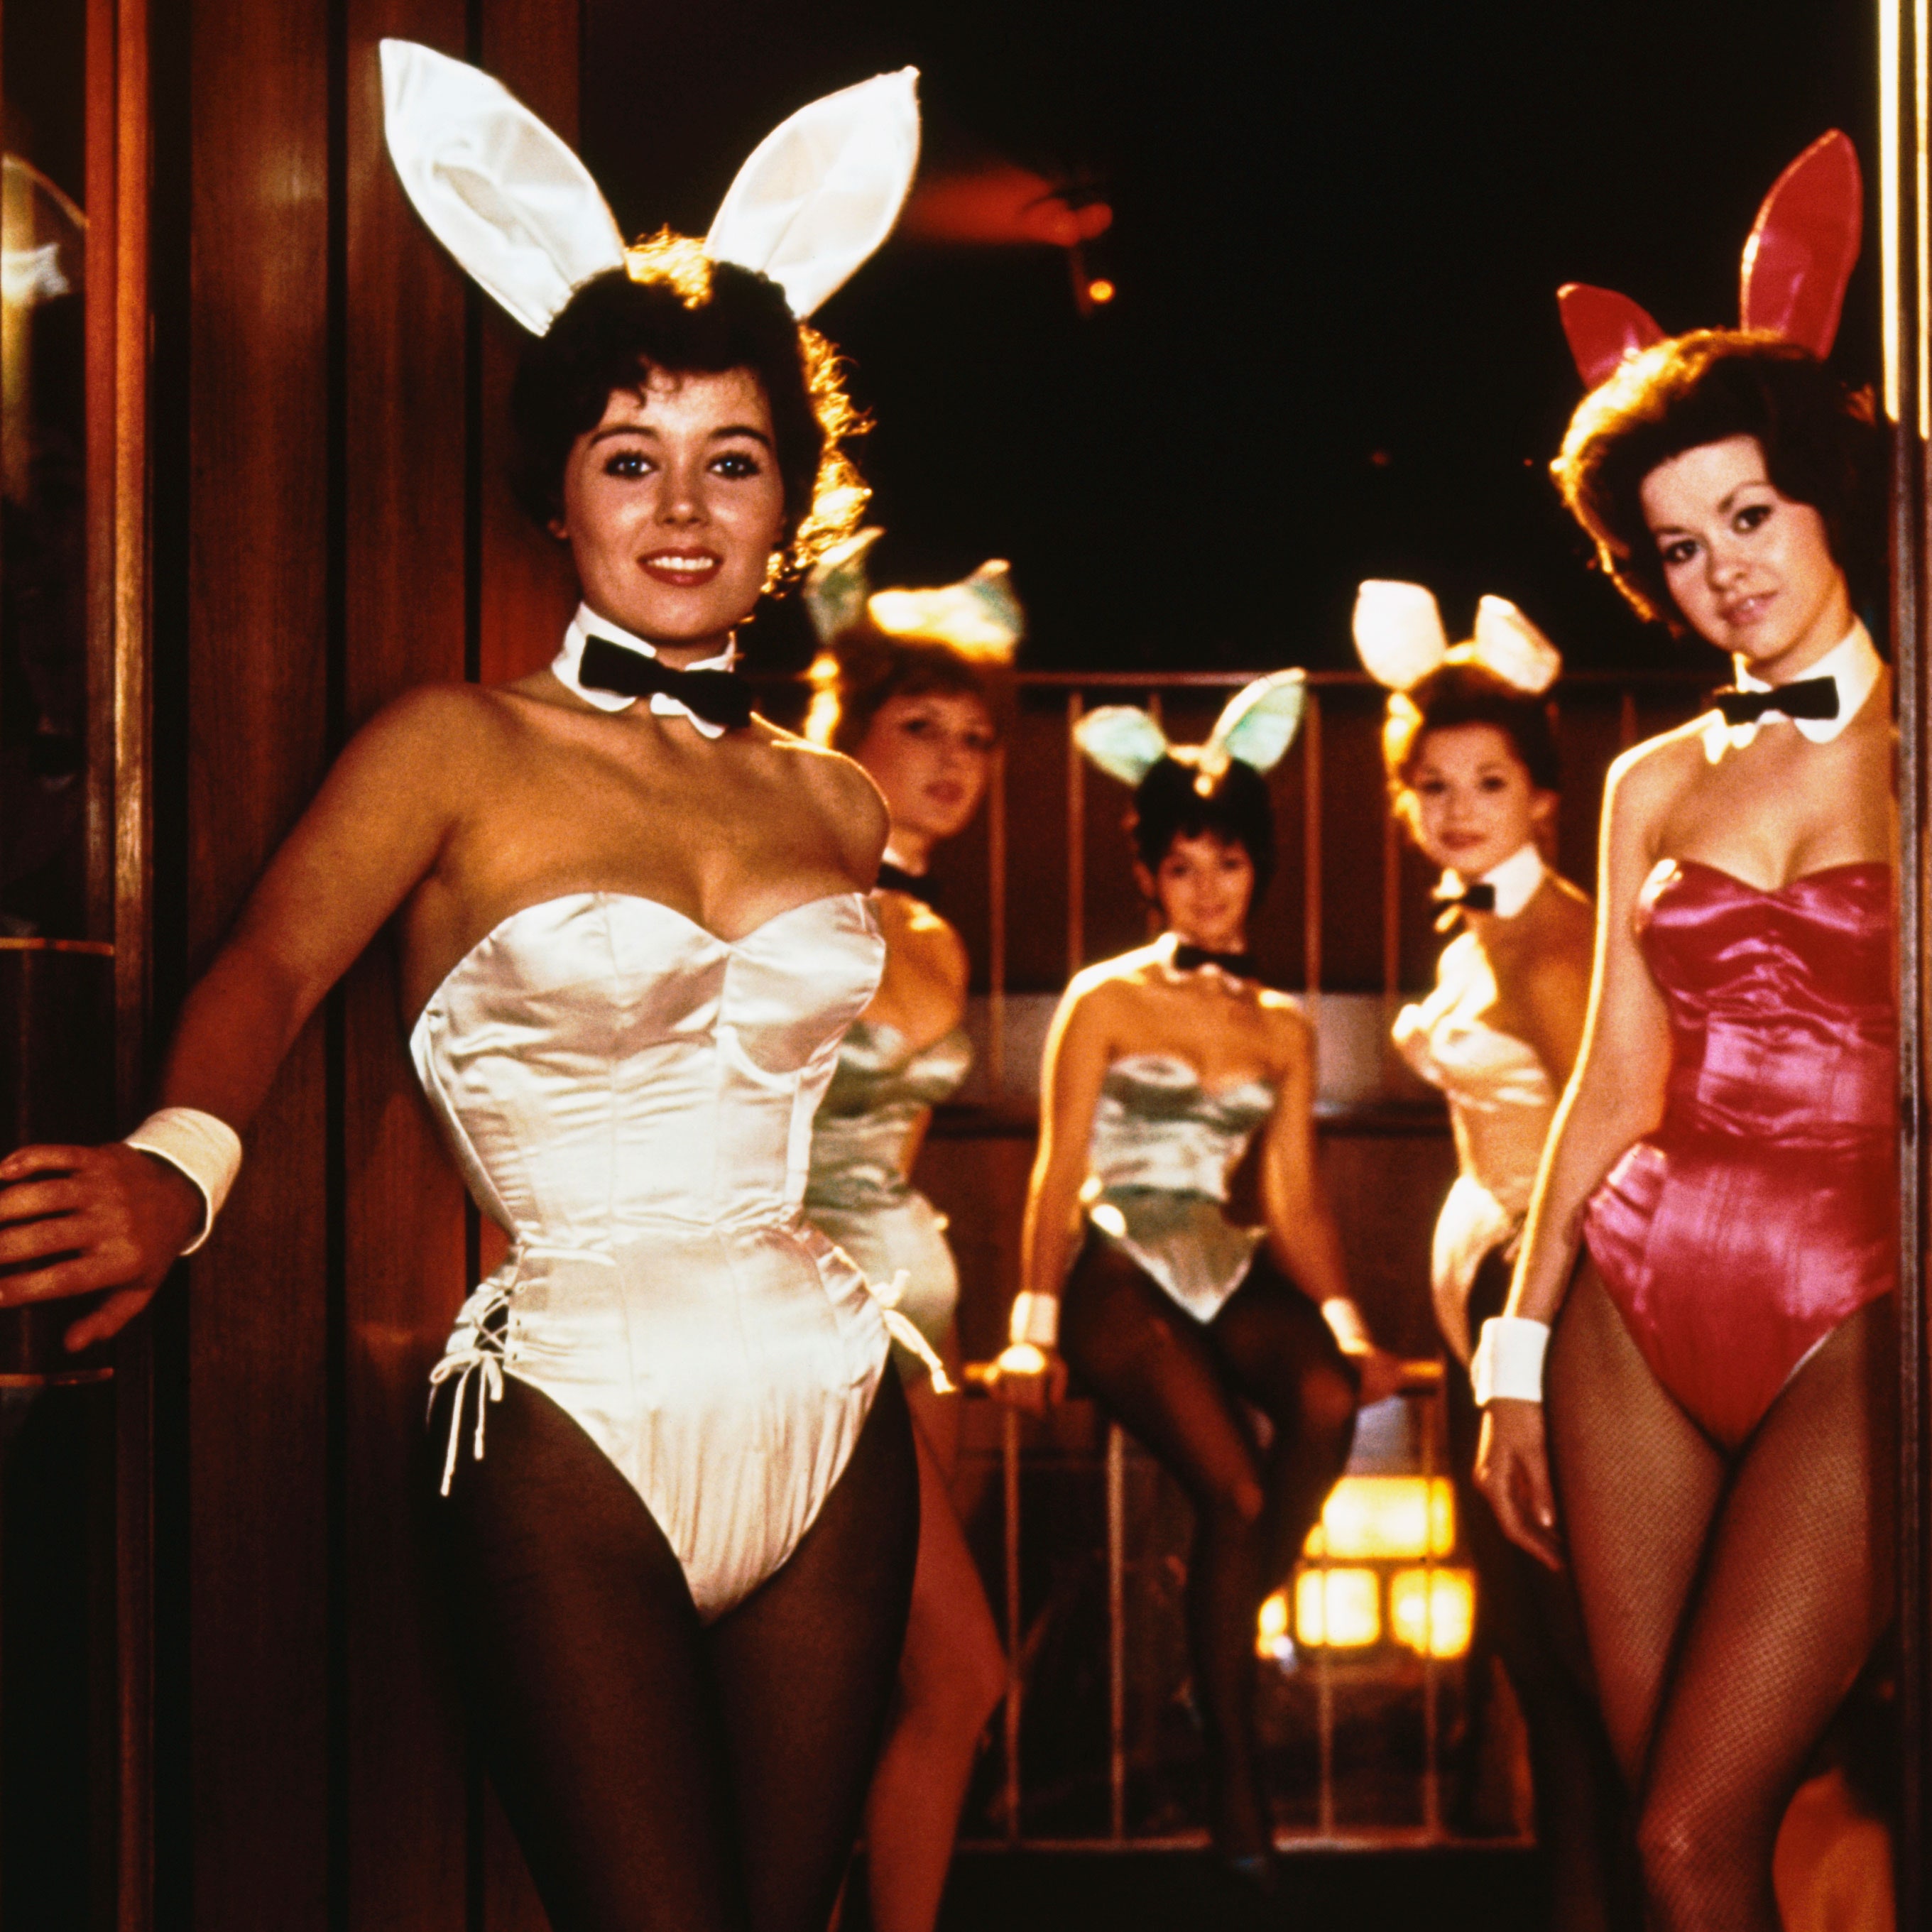 chad keefe recommends Vintage Playboy Bunny